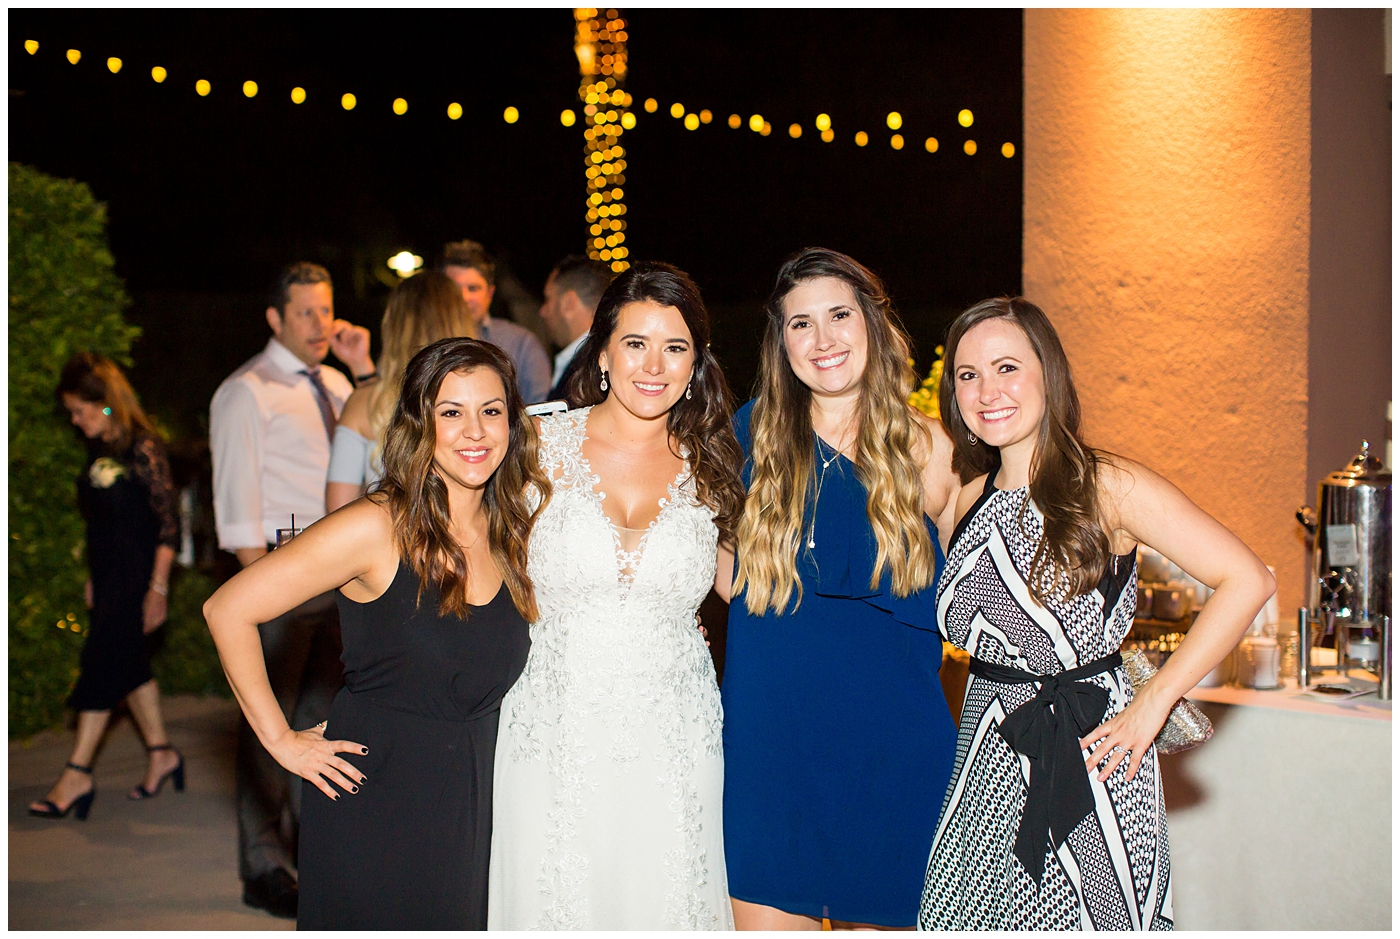 Bride with friends at wedding reception